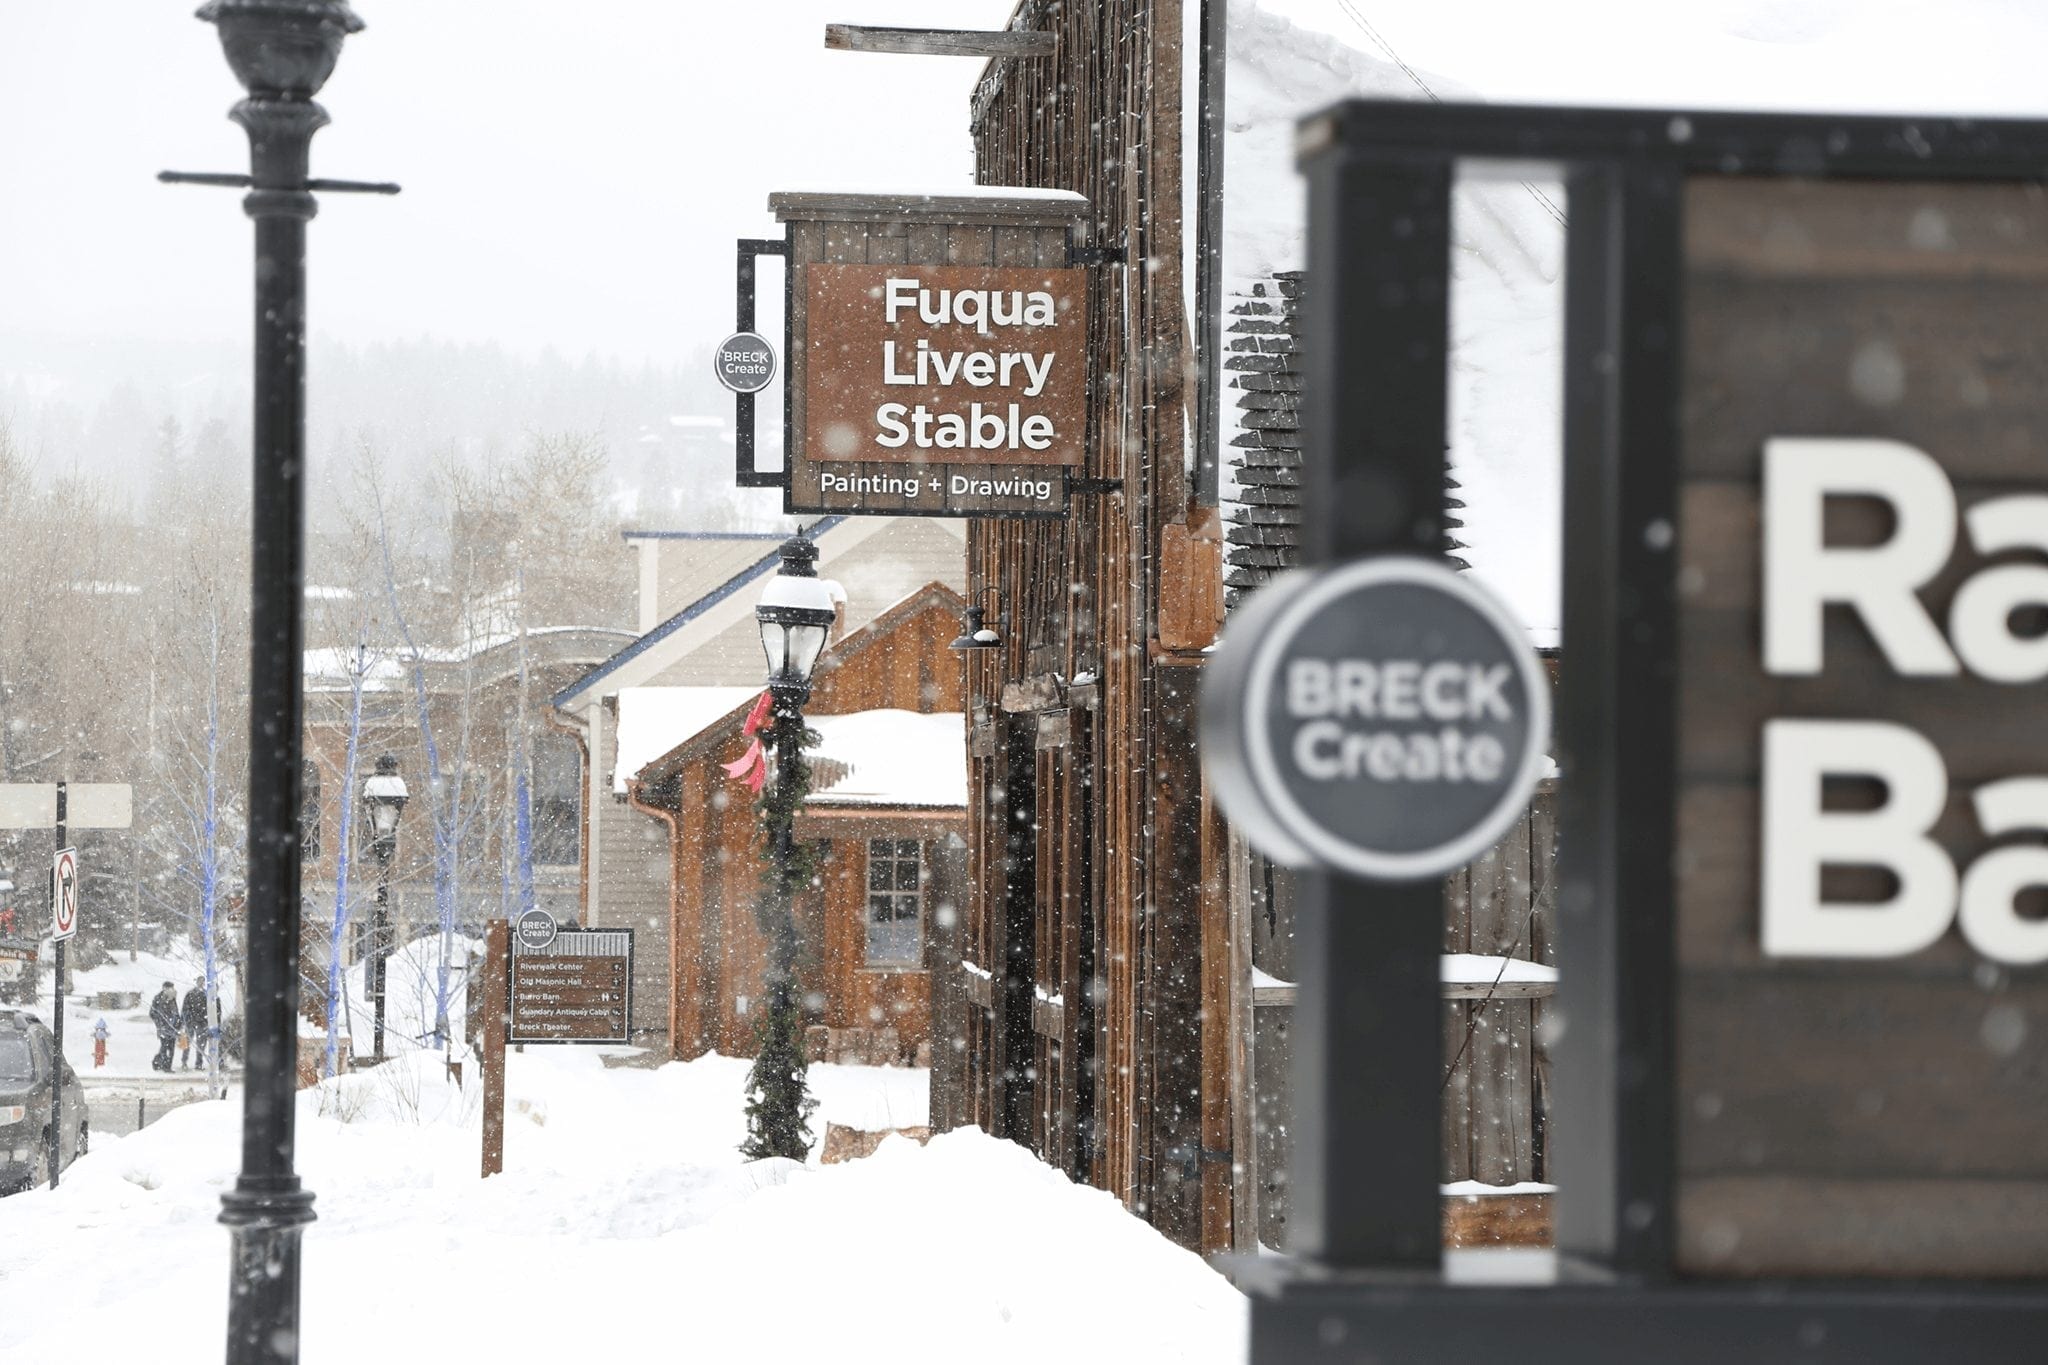 Shops in Downtown Breckenridge with Snow Falling